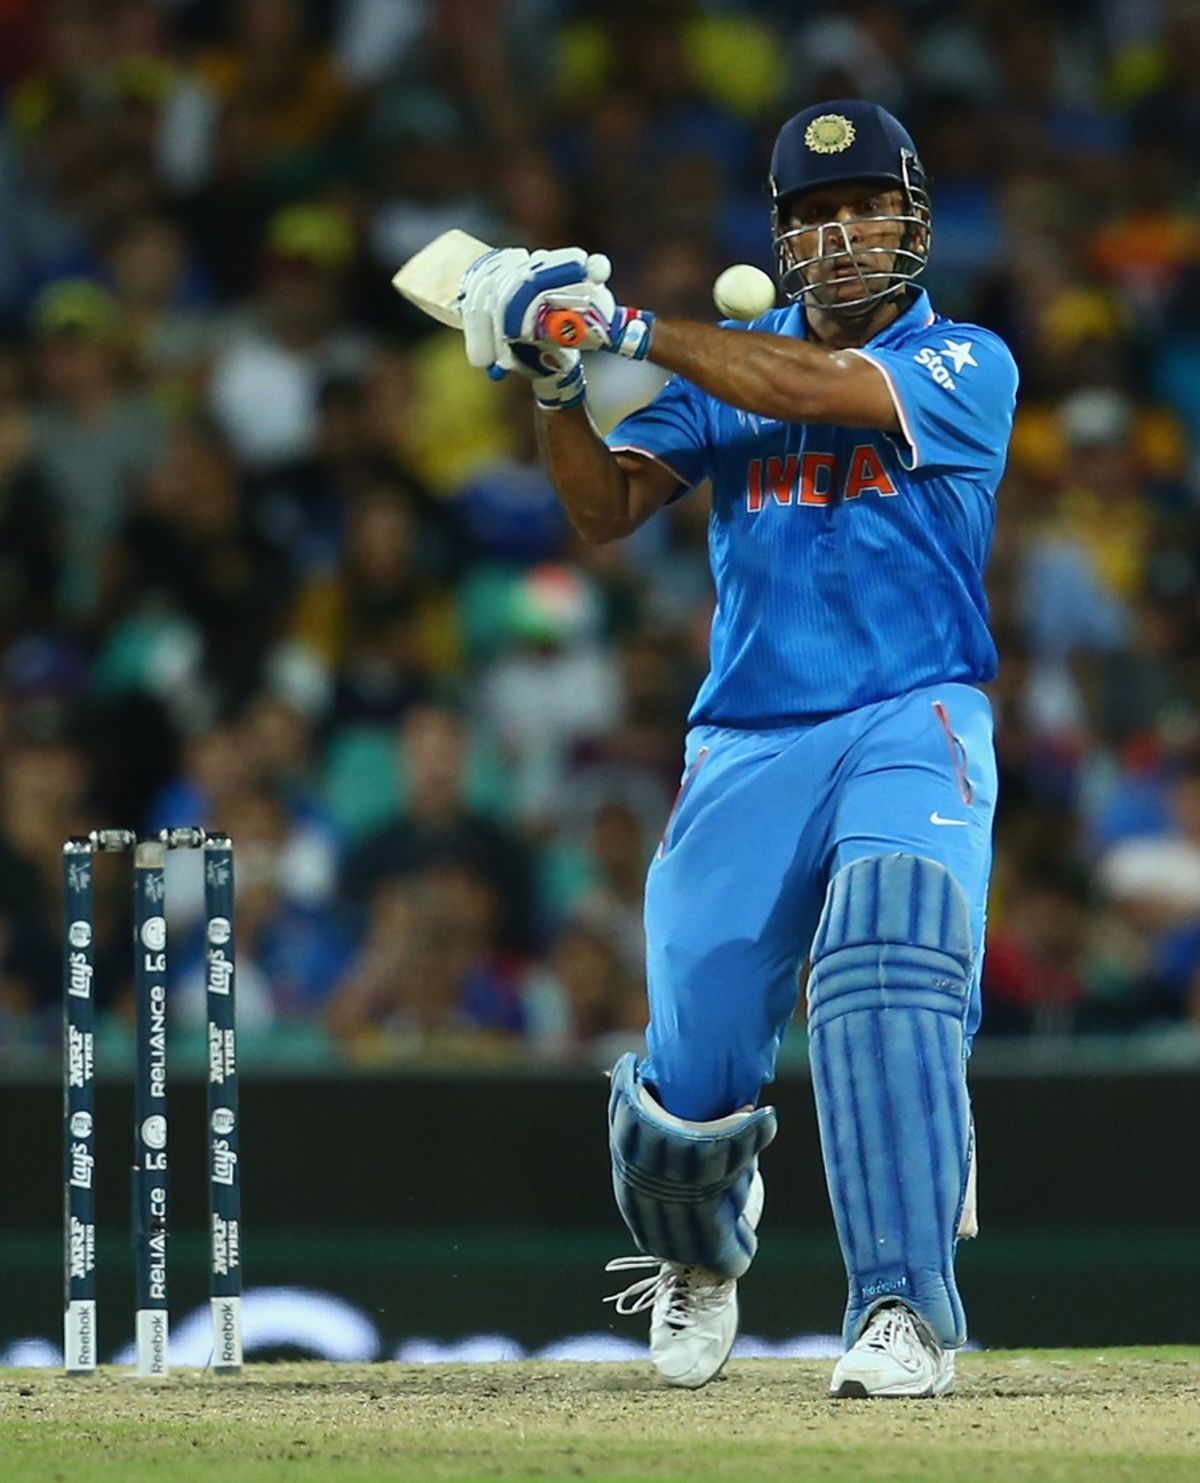 MS Dhoni winds up for a big blow, Australia v India, World Cup 2015, 2nd semi-final, Sydney, March 26, 2015